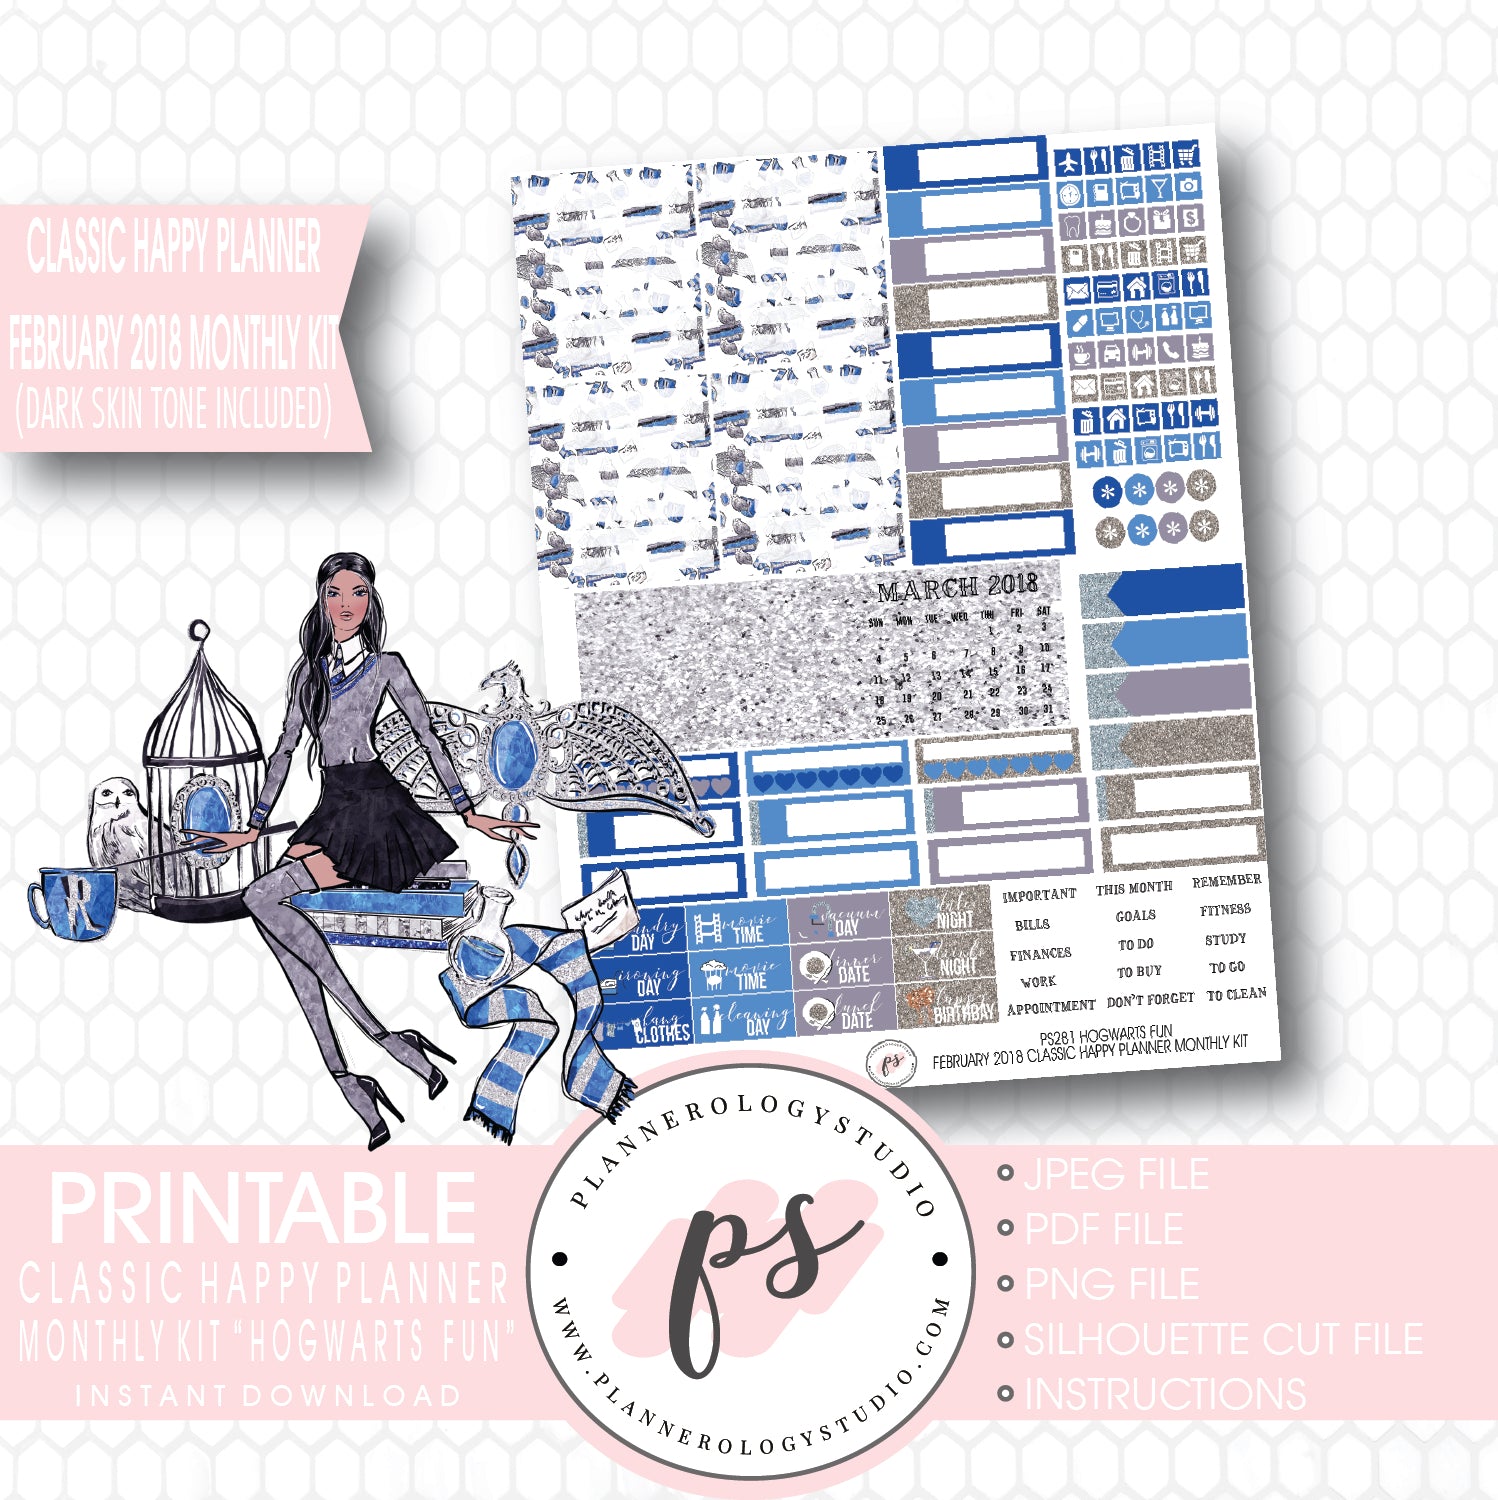 Hogwarts Fun (Harry Potter Theme) February 2018 Monthly View Kit Printable Planner Stickers (for use with Classic Happy Planner) (Dark & Light Skintone) - Plannerologystudio